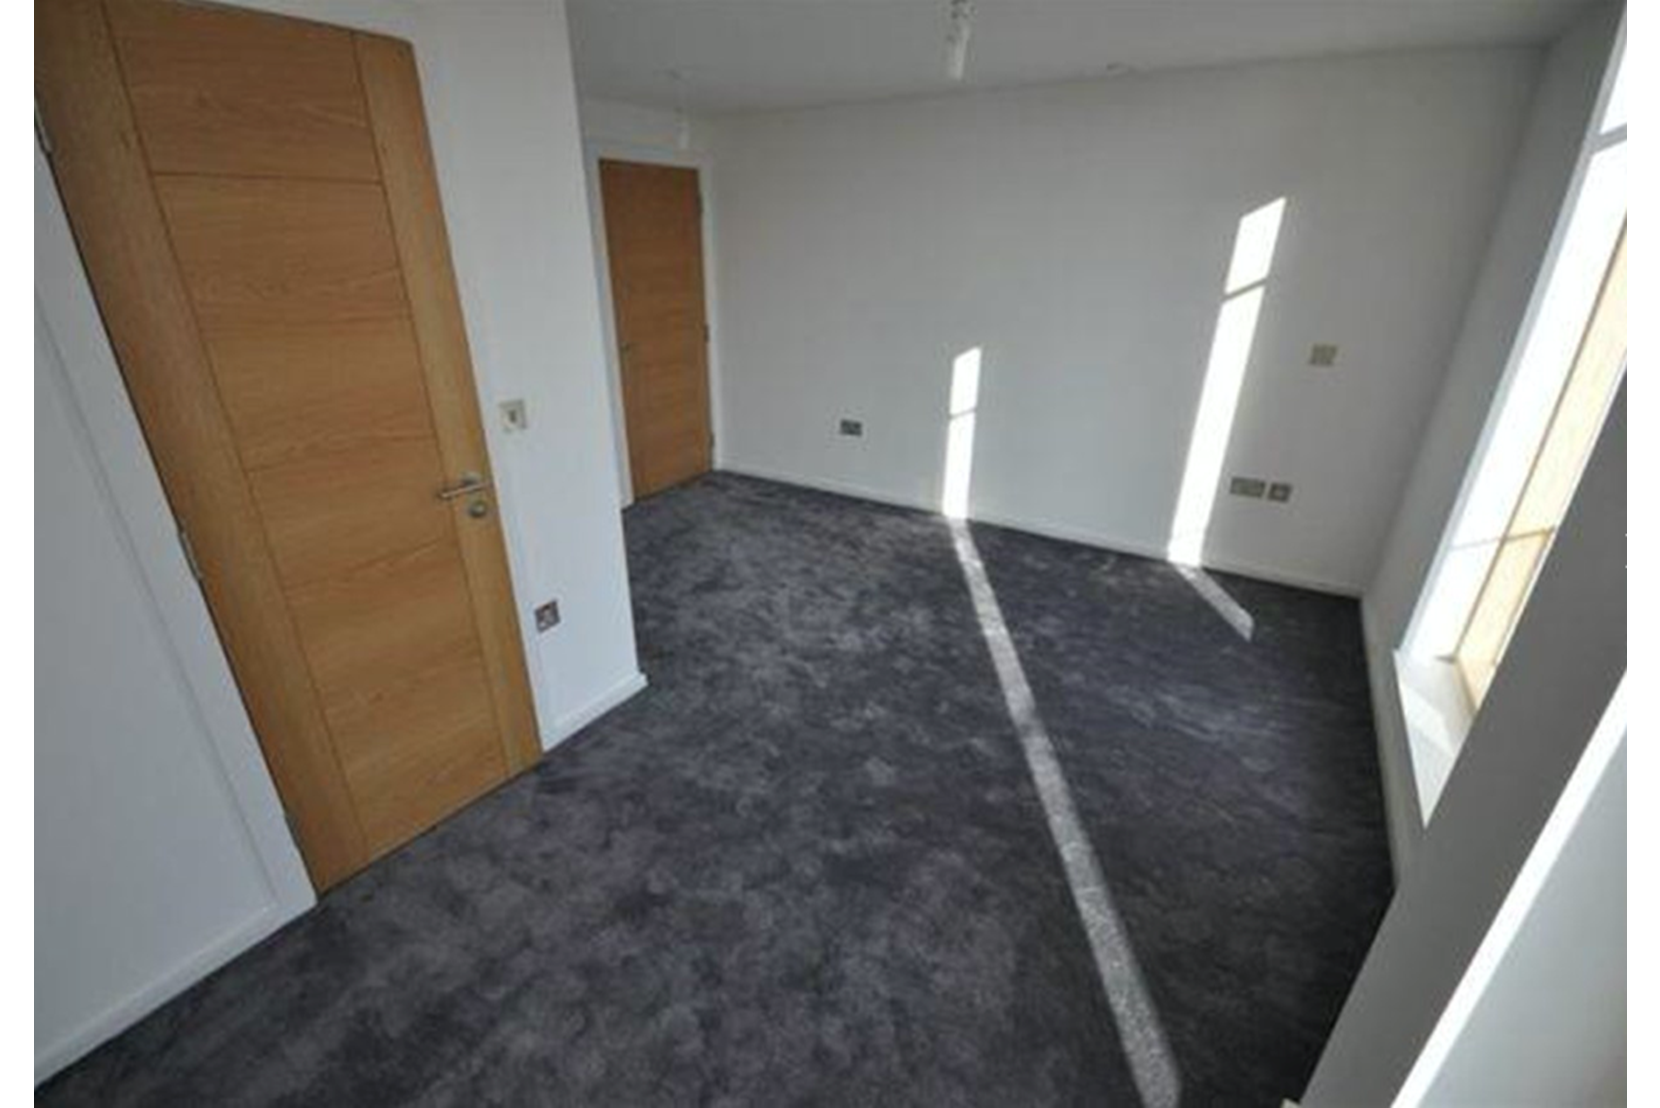 Apartment-Northern-Group-Ice-Plant-Manchester-interior-bedroom-1